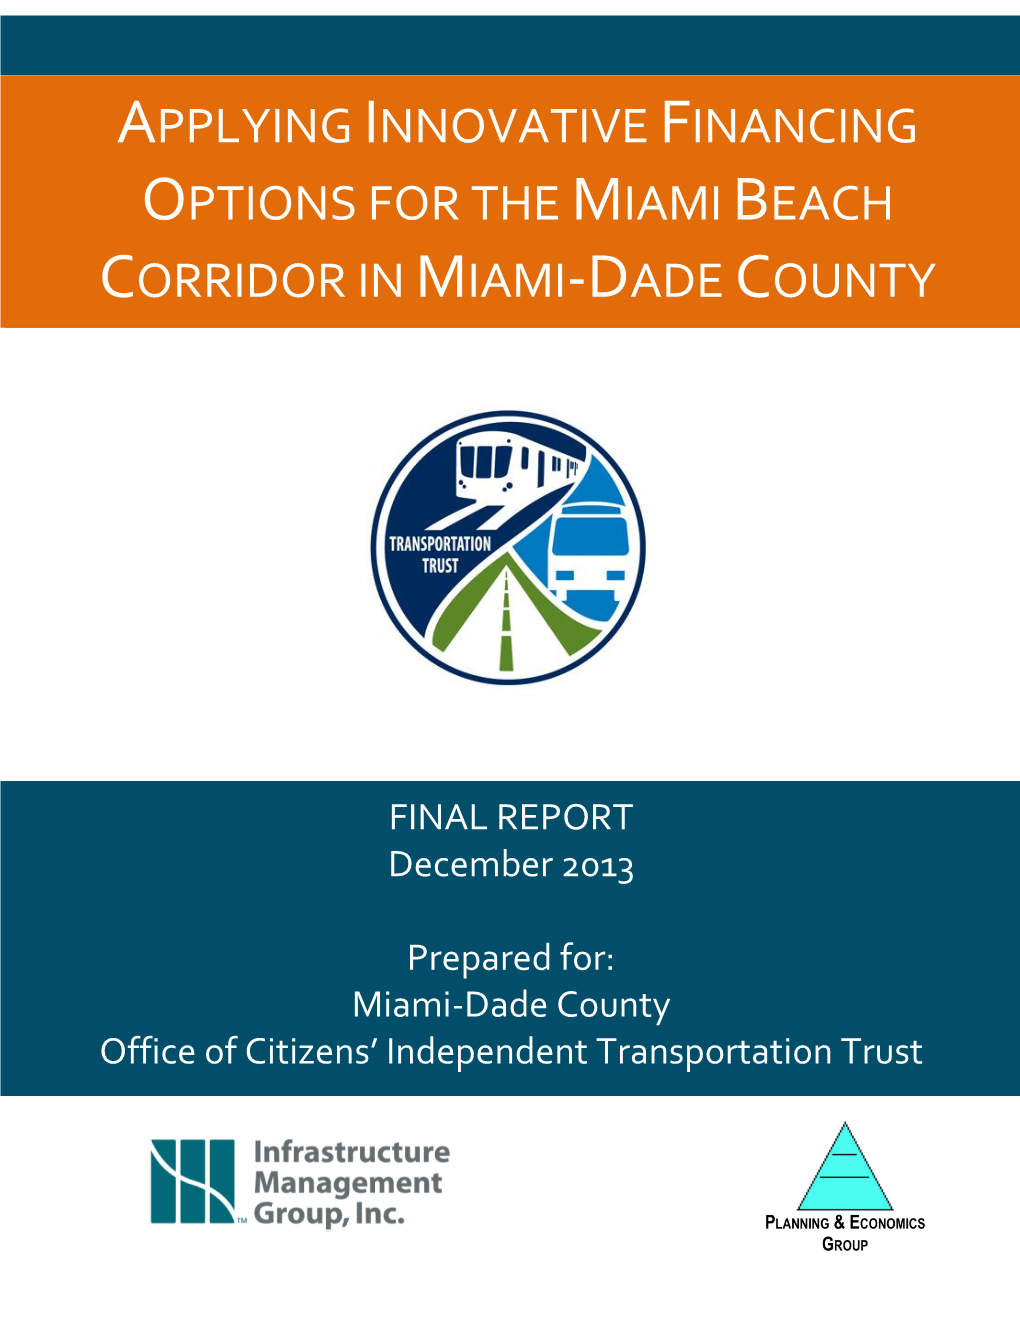 Applying Innovative Financing Options for the Miami Beach Corridor in Miami-Dade County